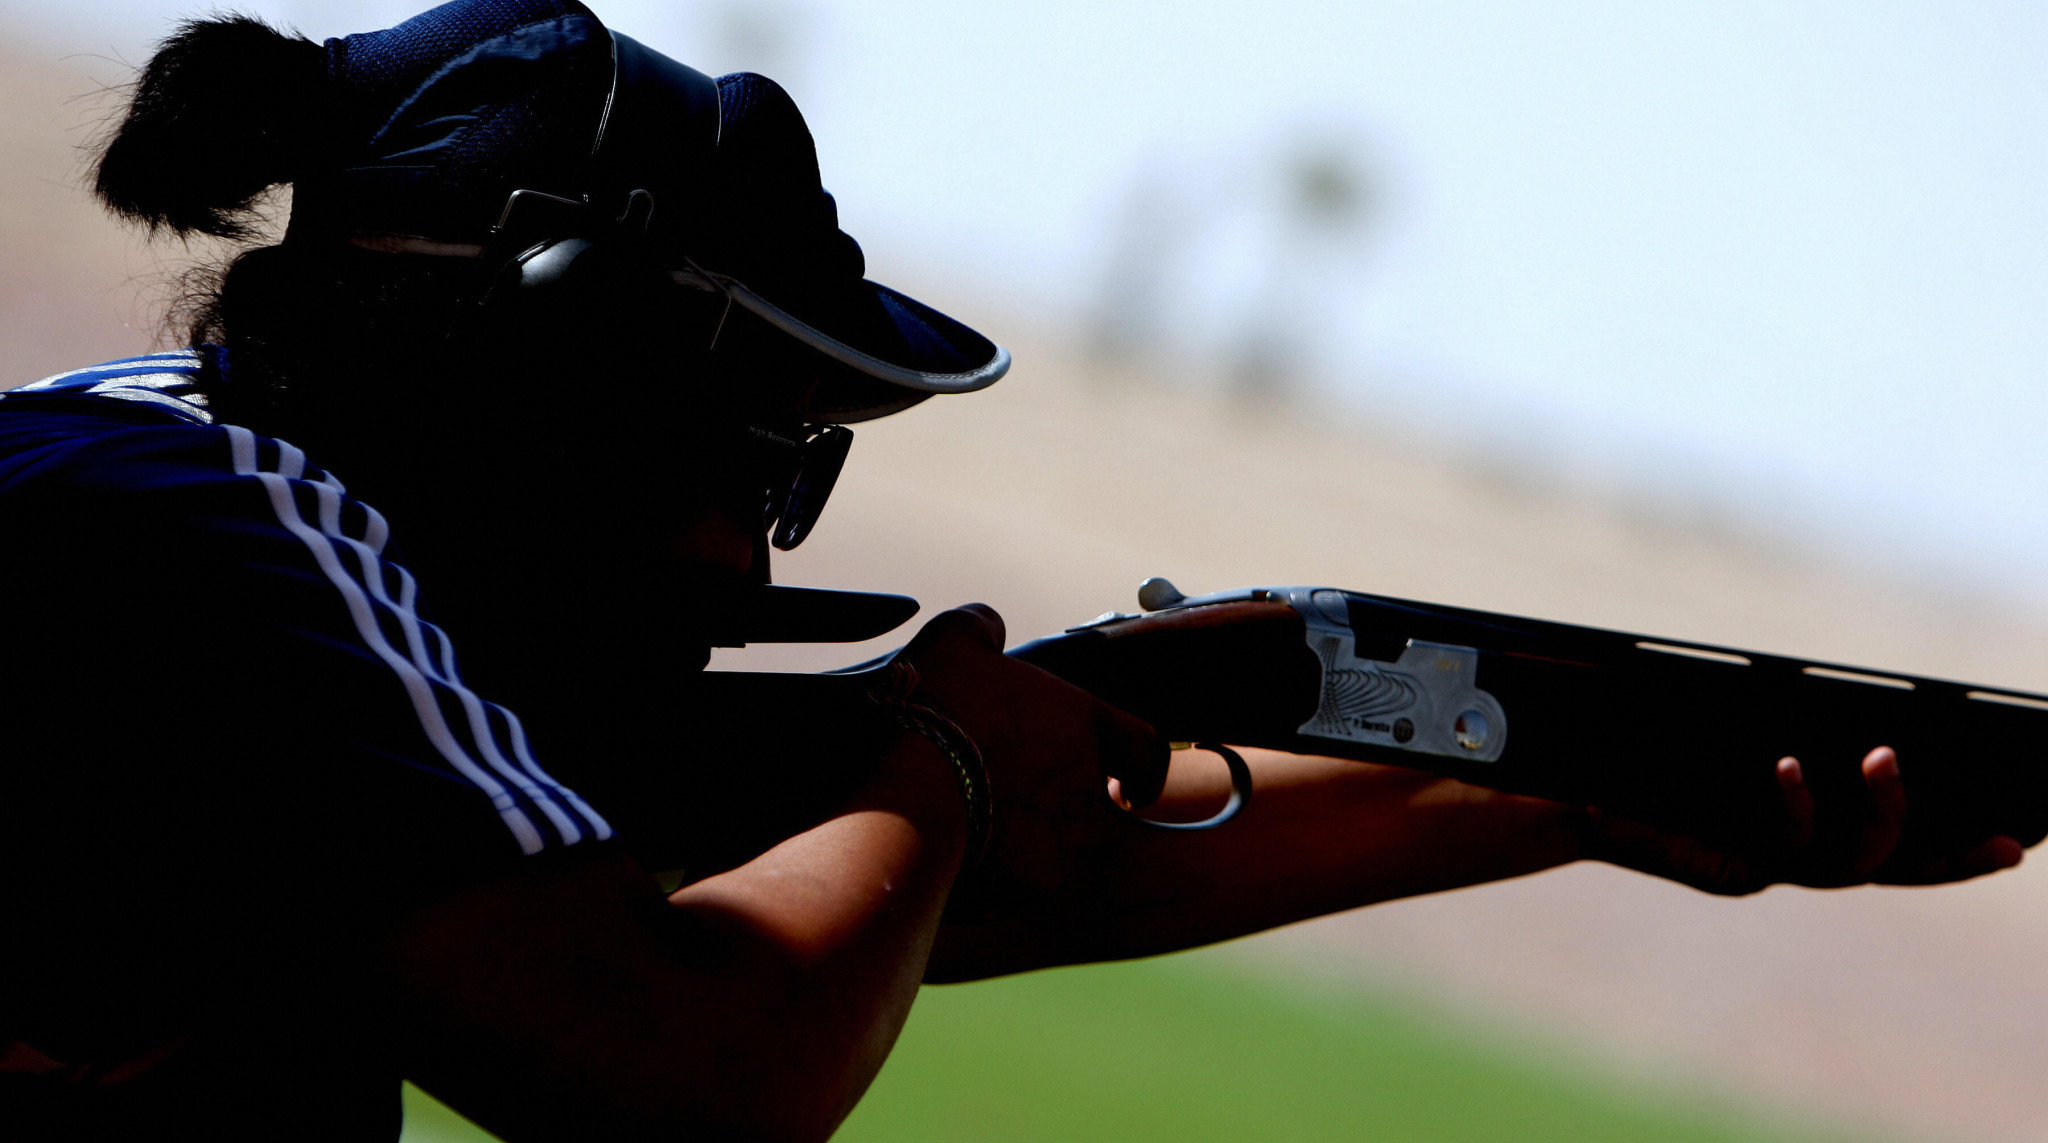 Sarah Alhawal won the women's individual trap ©Getty Images